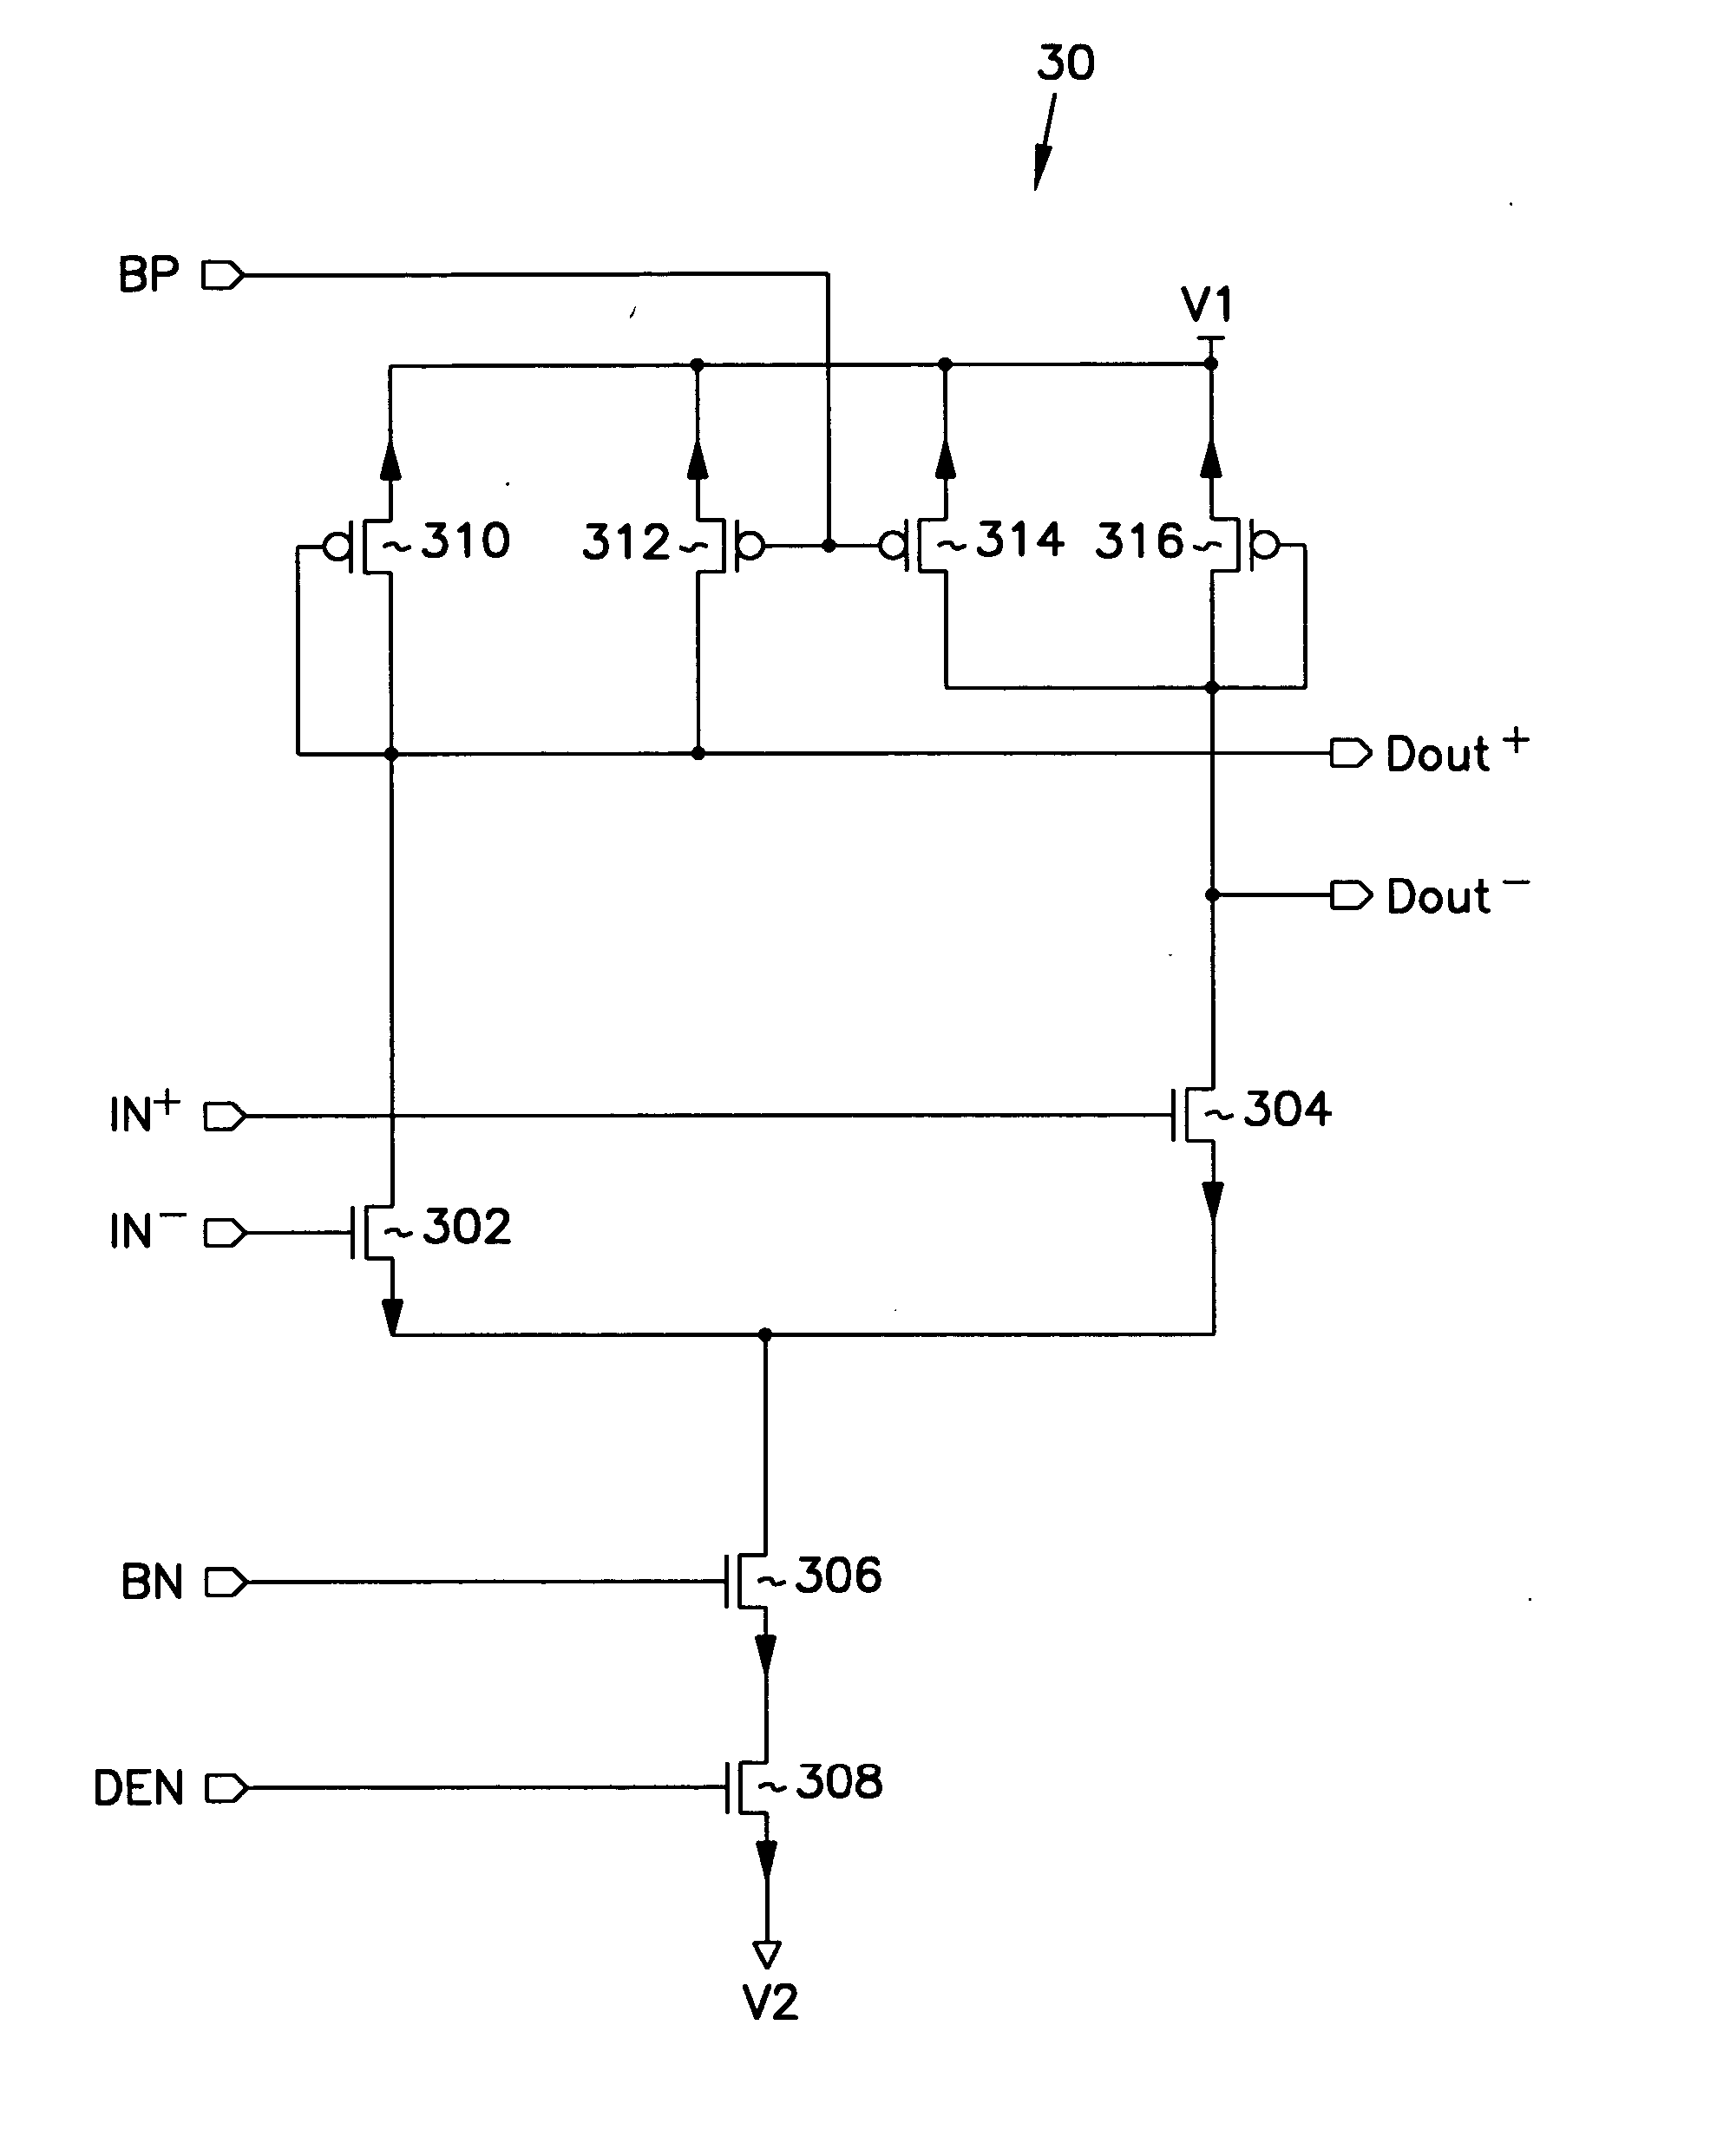 Interlaced delay-locked loolps for controlling memory-circuit timing